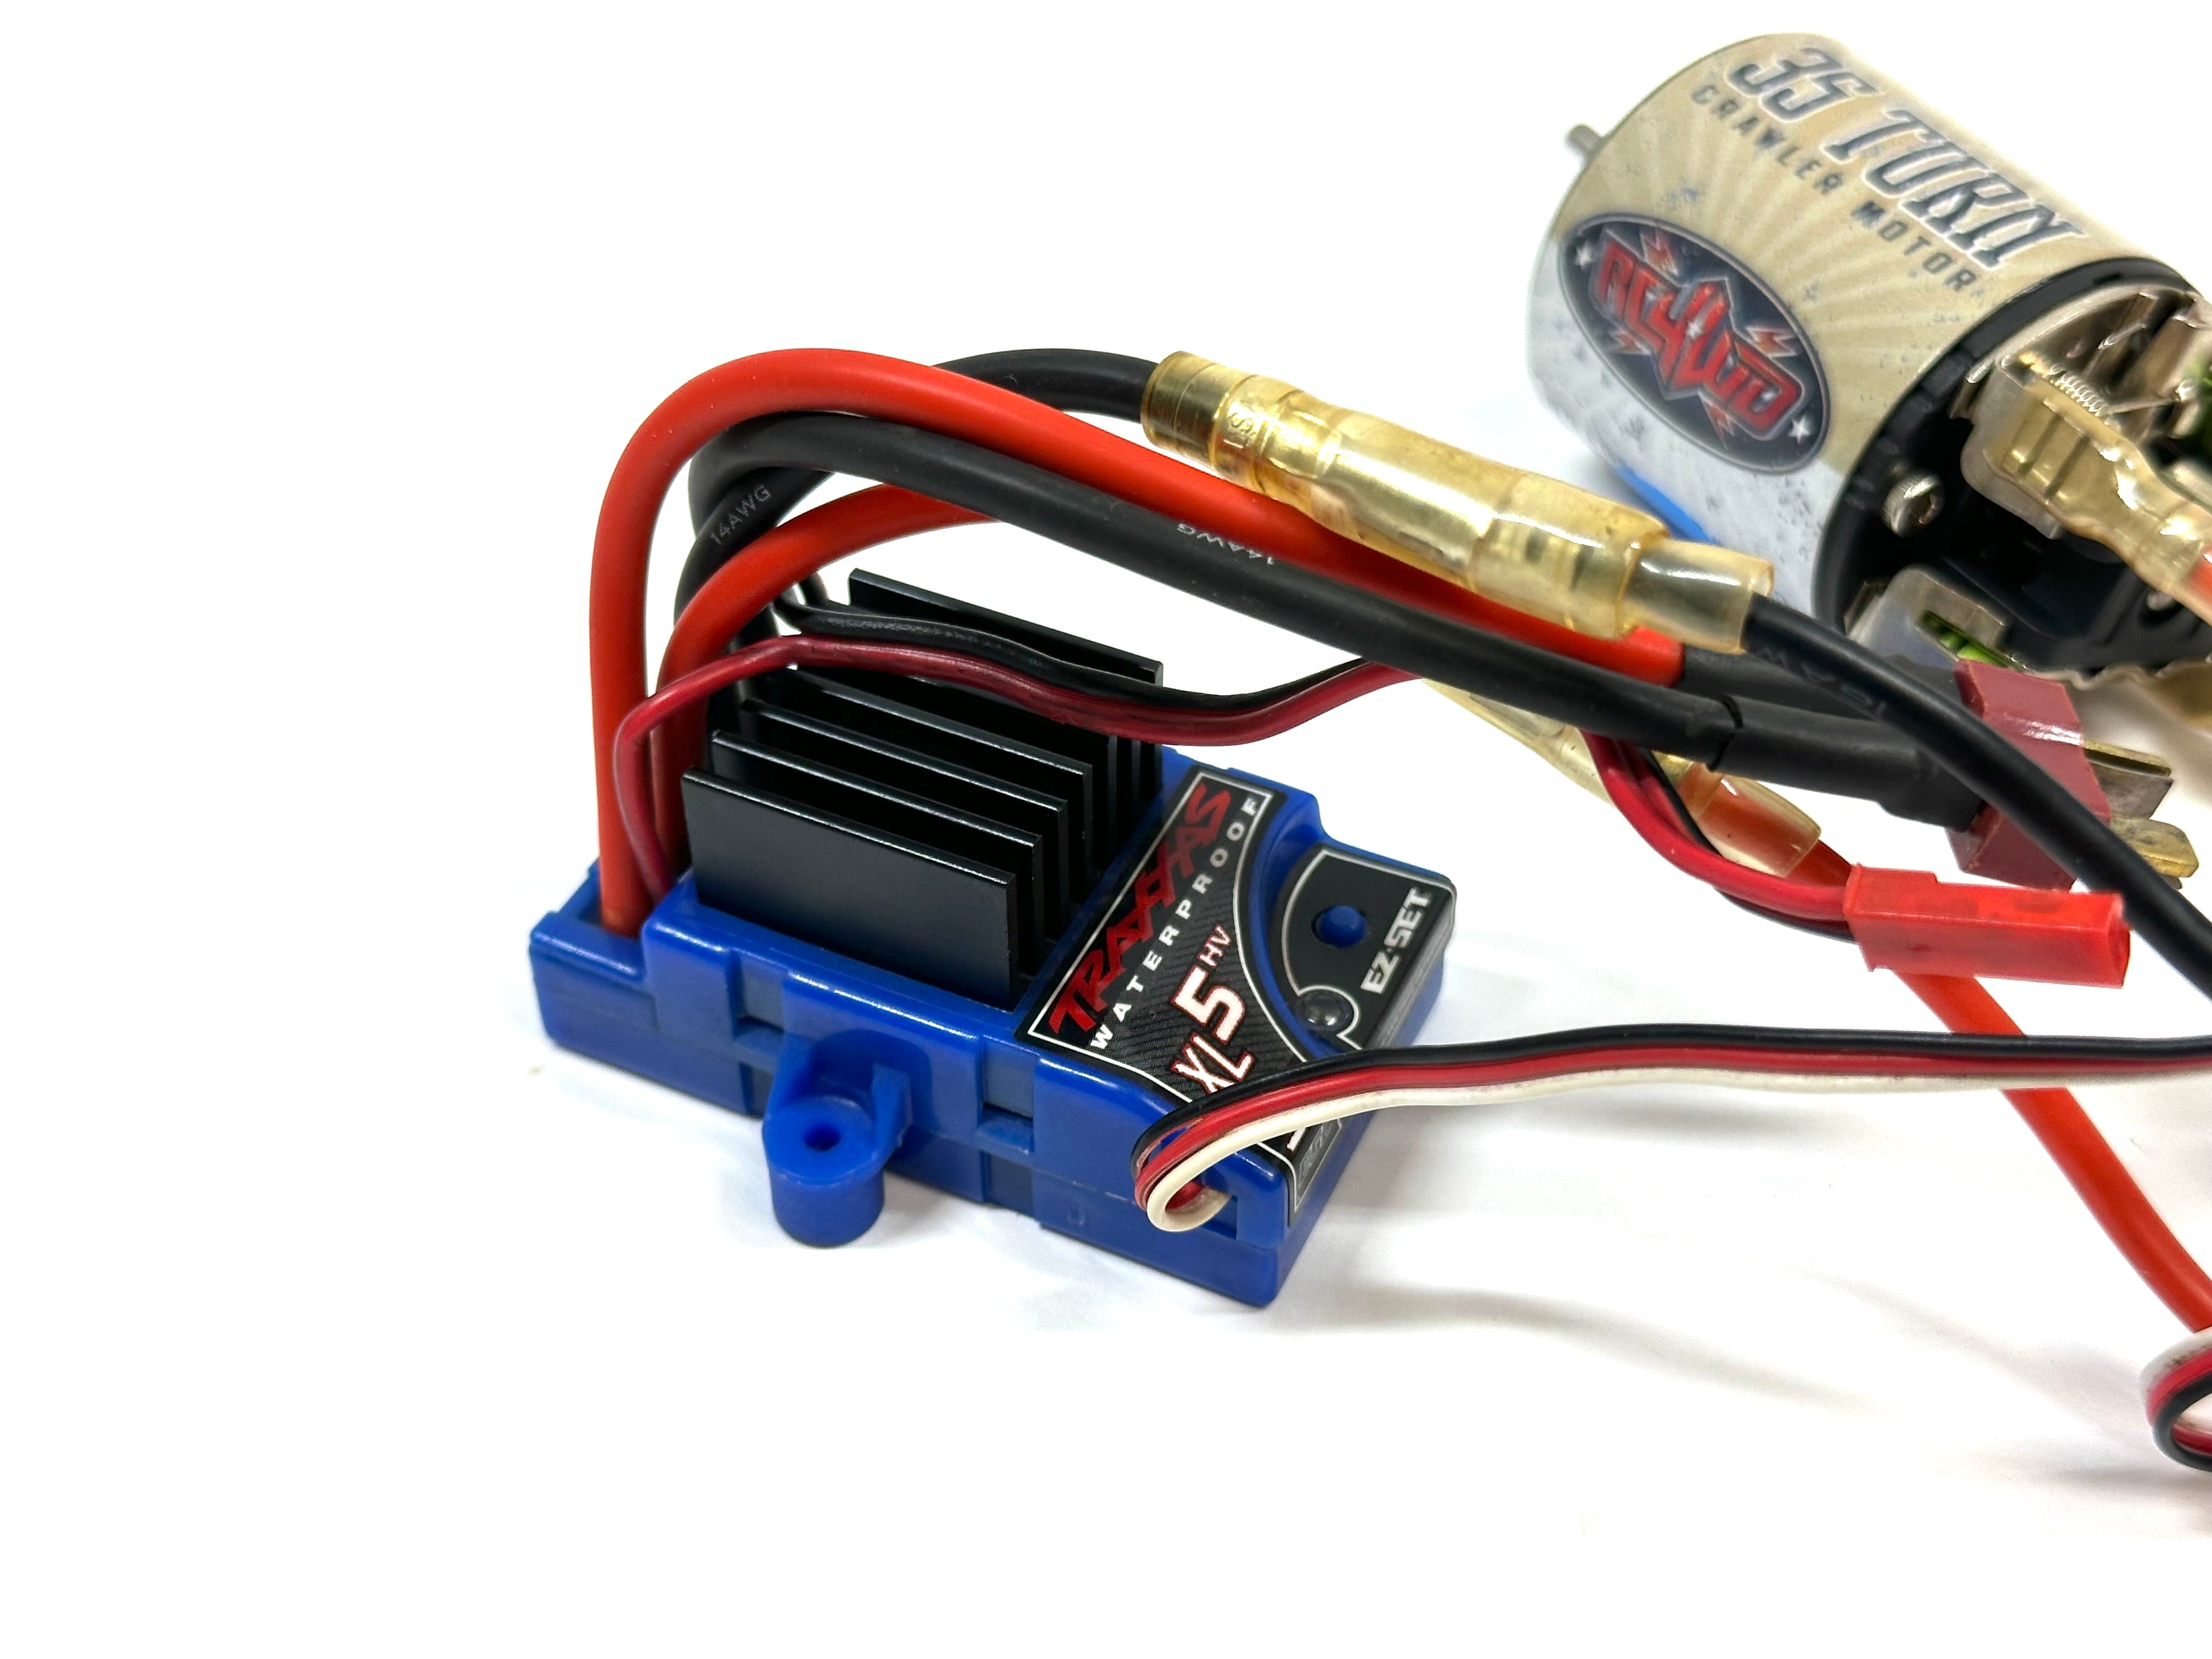 Traxxas XL5HV Brushed ESC & RC4WD 35T Brushed Rebuildable Motor